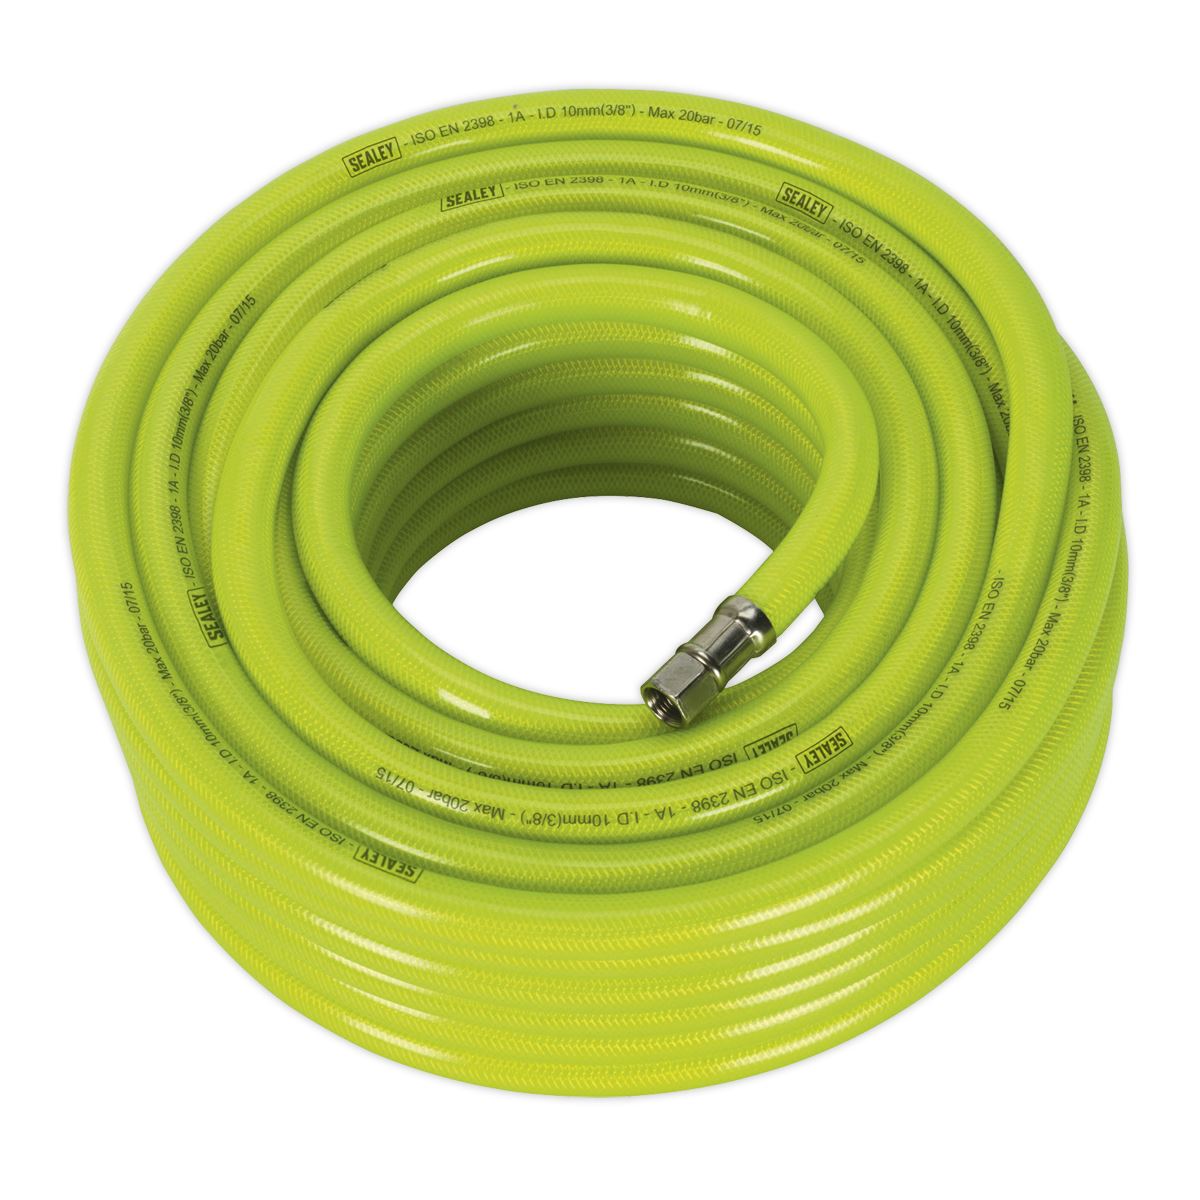 Sealey Air Hose High-Visibility 20m x Ø10mm with 1/4"BSP Unions